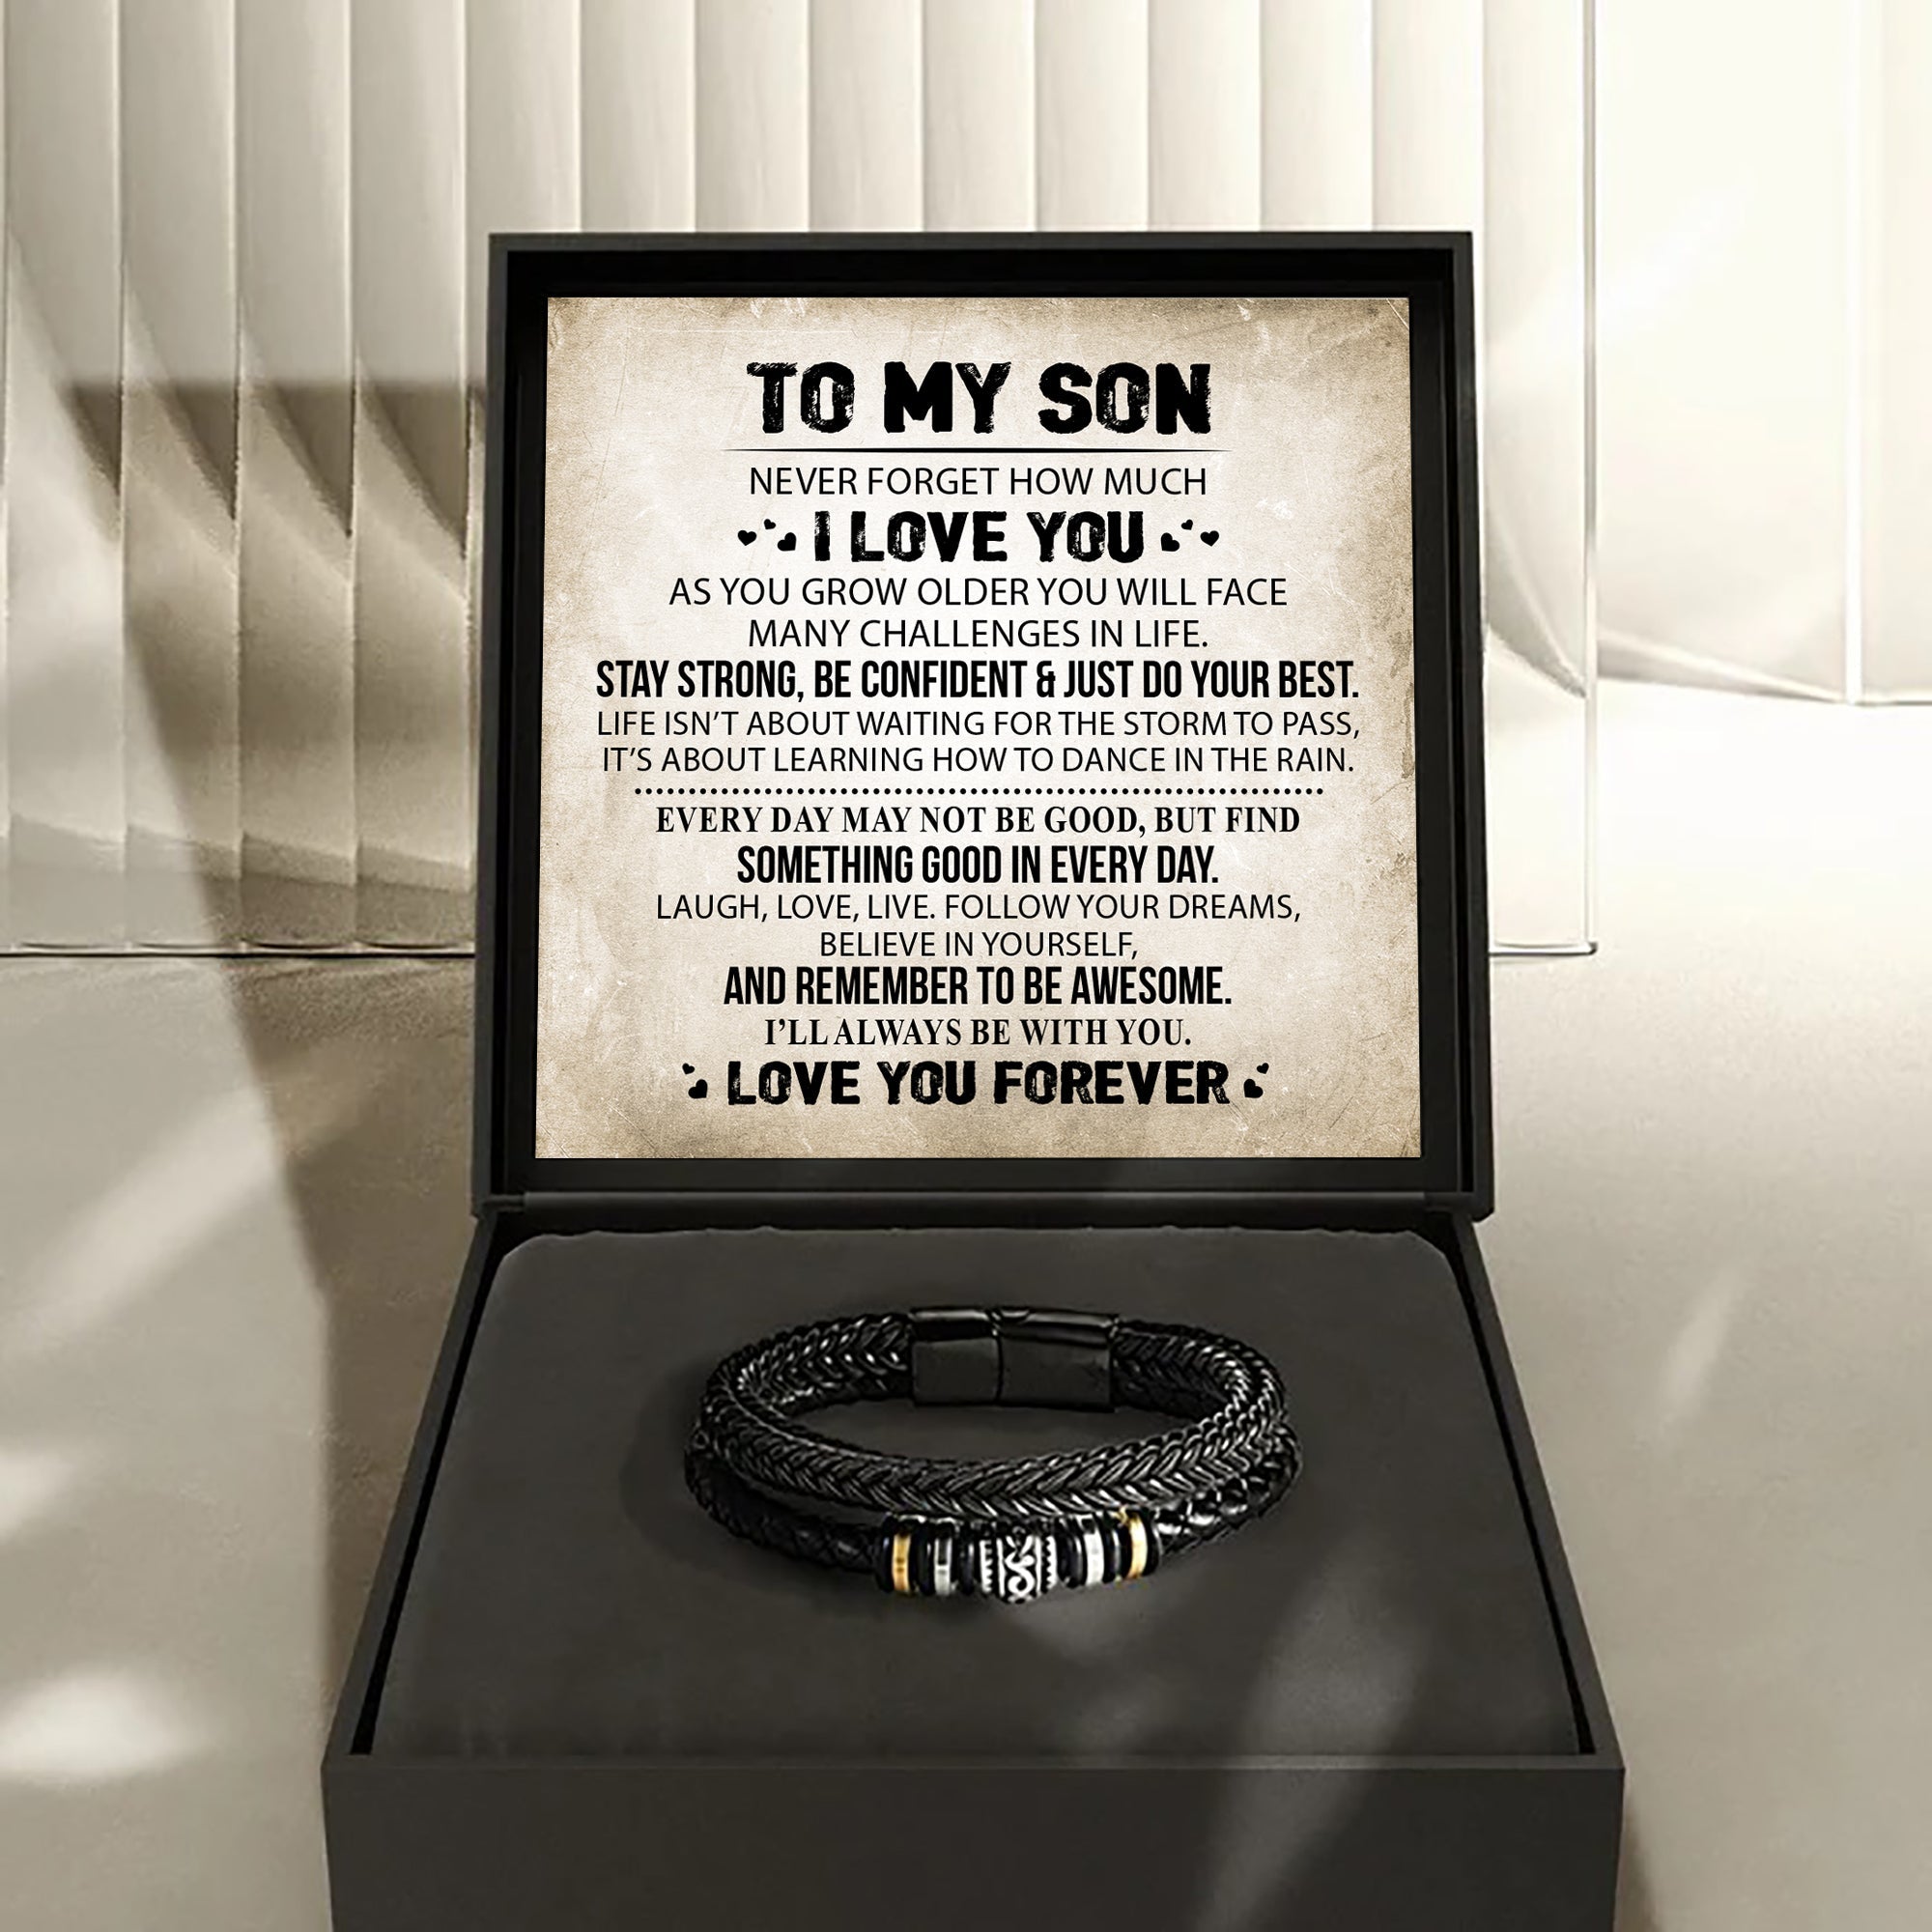 To My Son - "I Love You Forever" Gifting Set